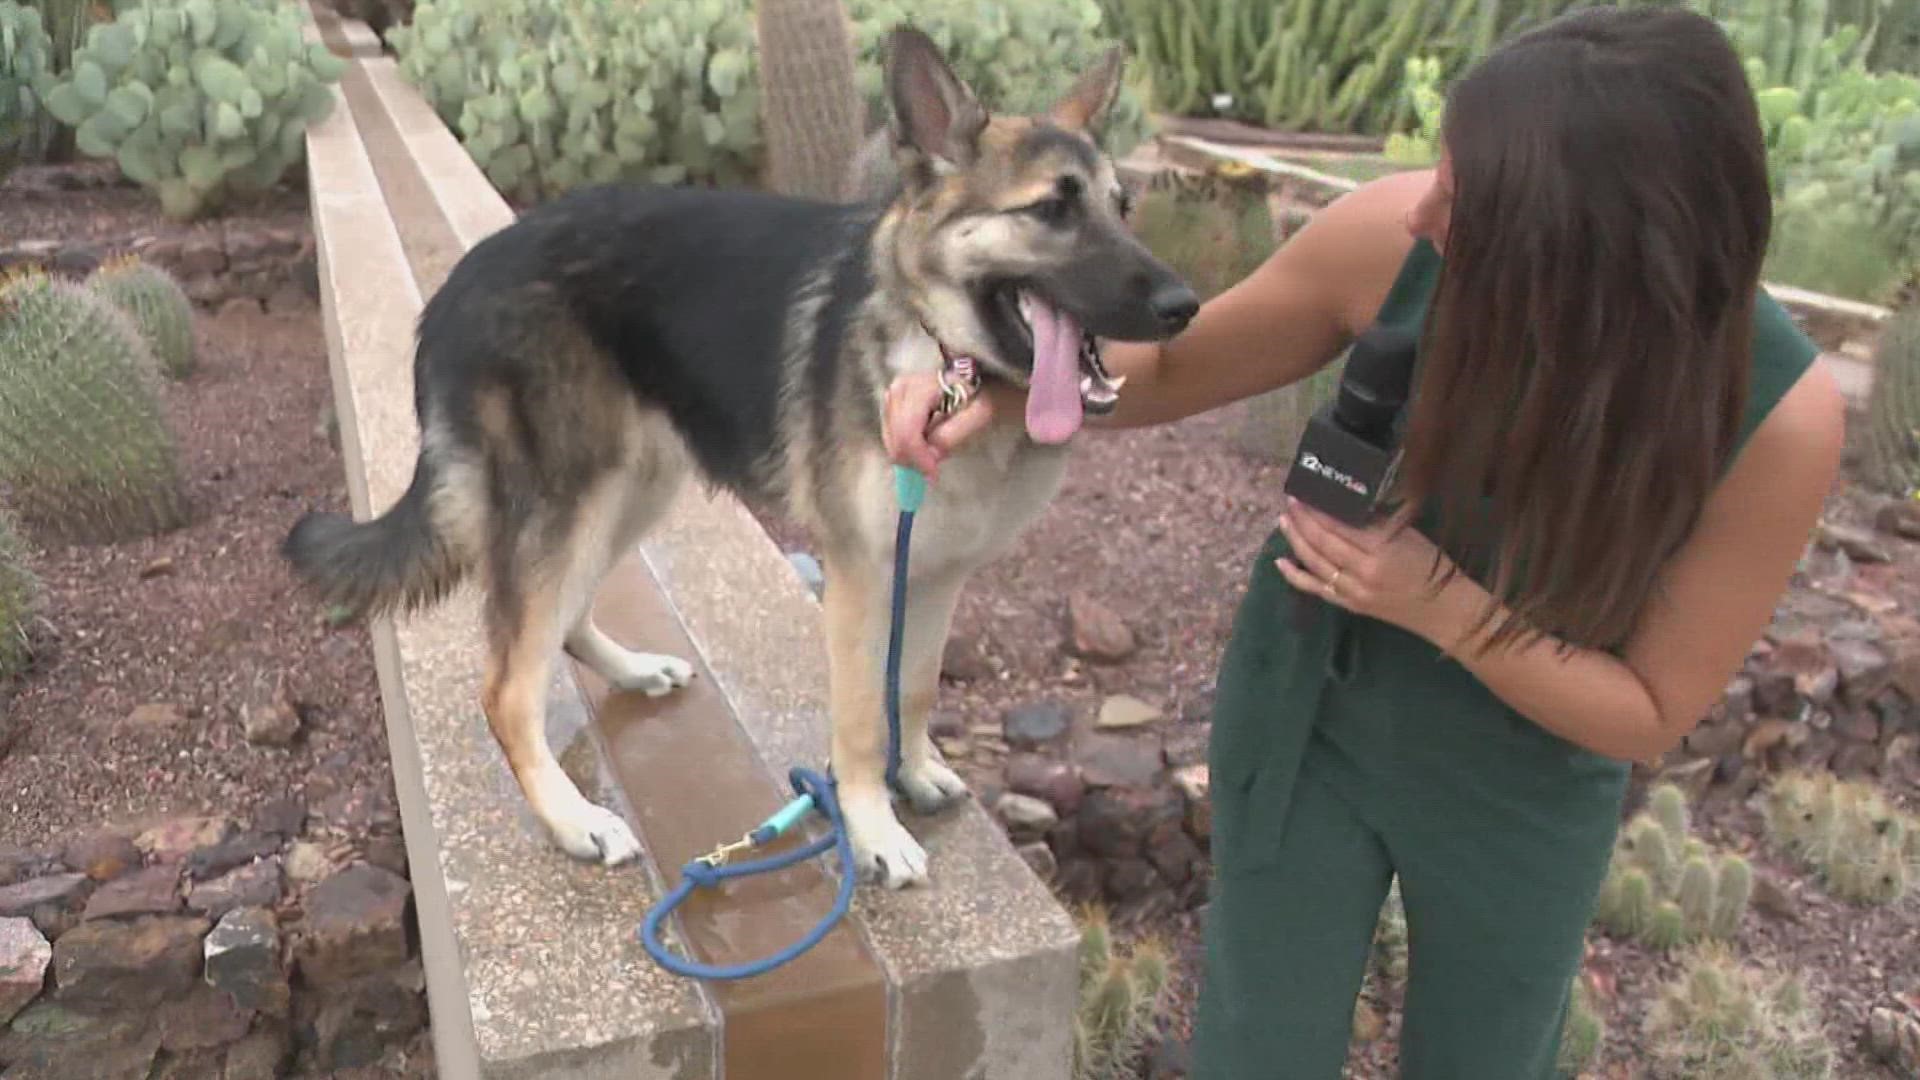 If you're looking for something to do in the Phoenix area, here's how to participate in "Dogs Day in the Garden" at the Desert Botanical Garden.